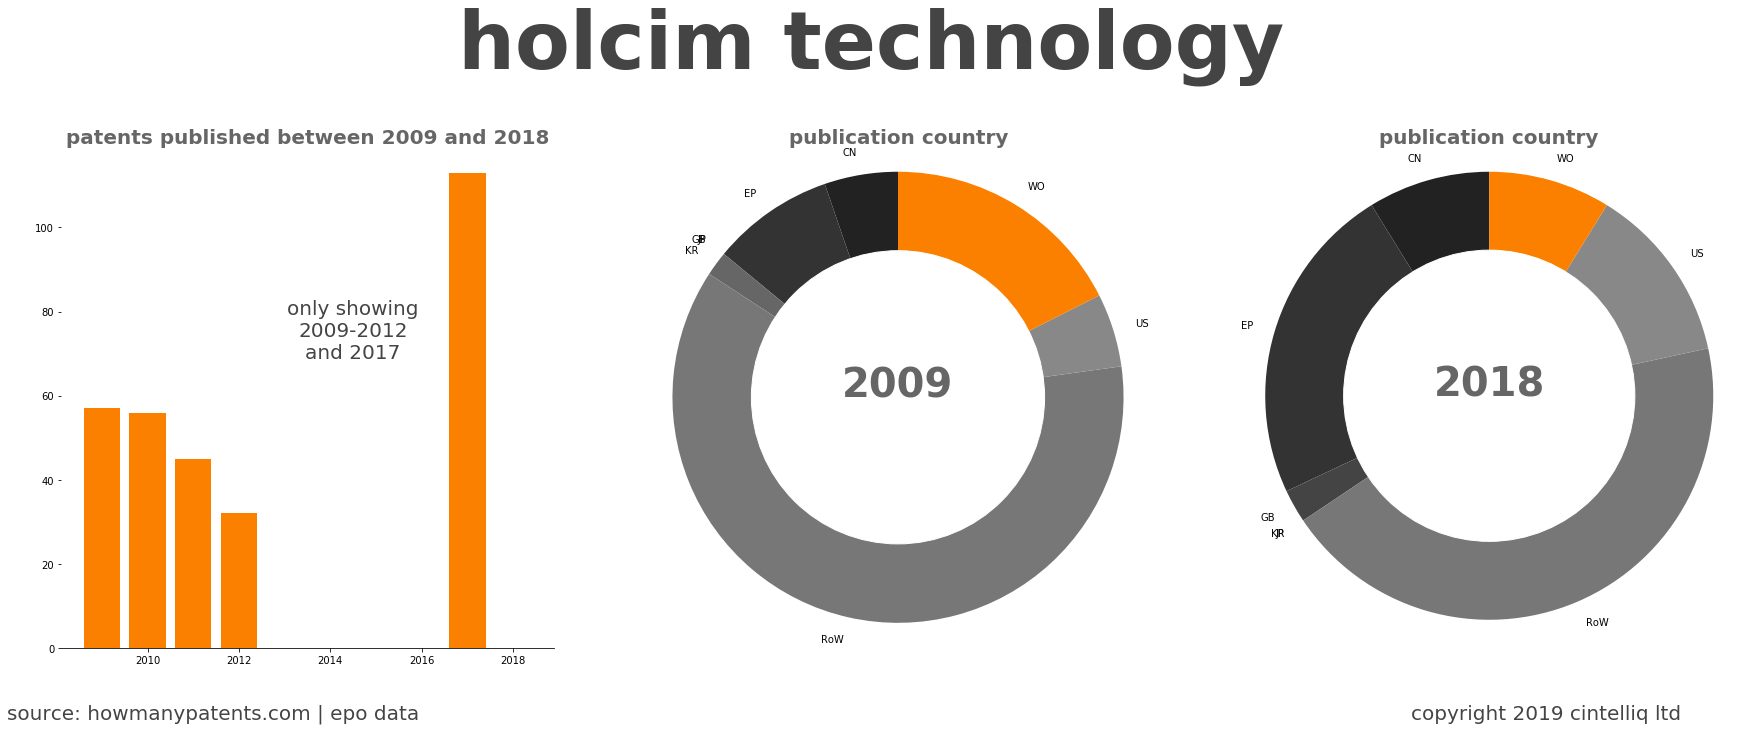 summary of patents for Holcim Technology